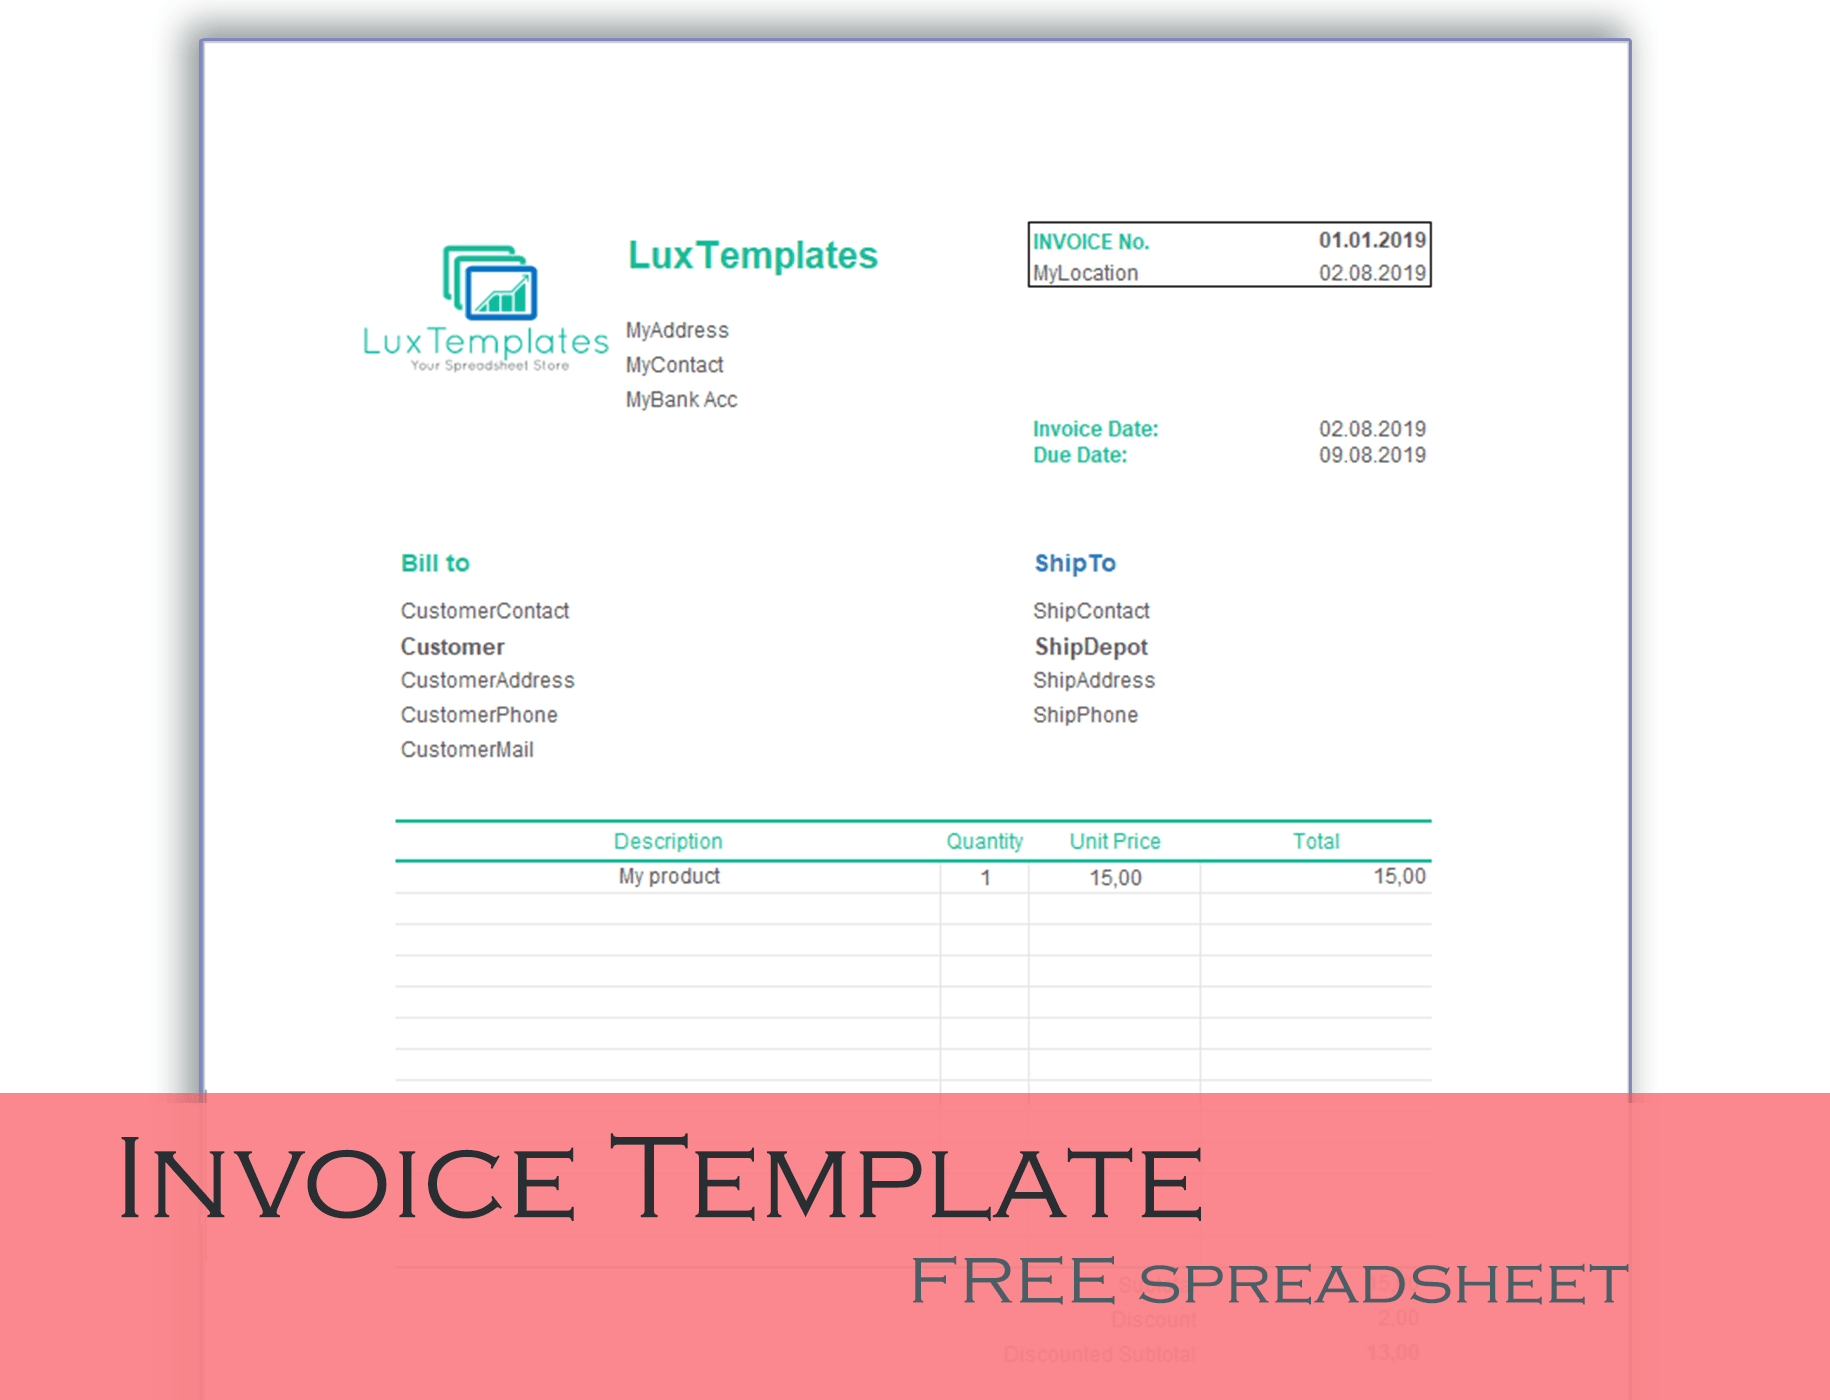 Invoice Templates for Excel - Free Spreadsheet  LuxTemplates Within Xl Invoice Template